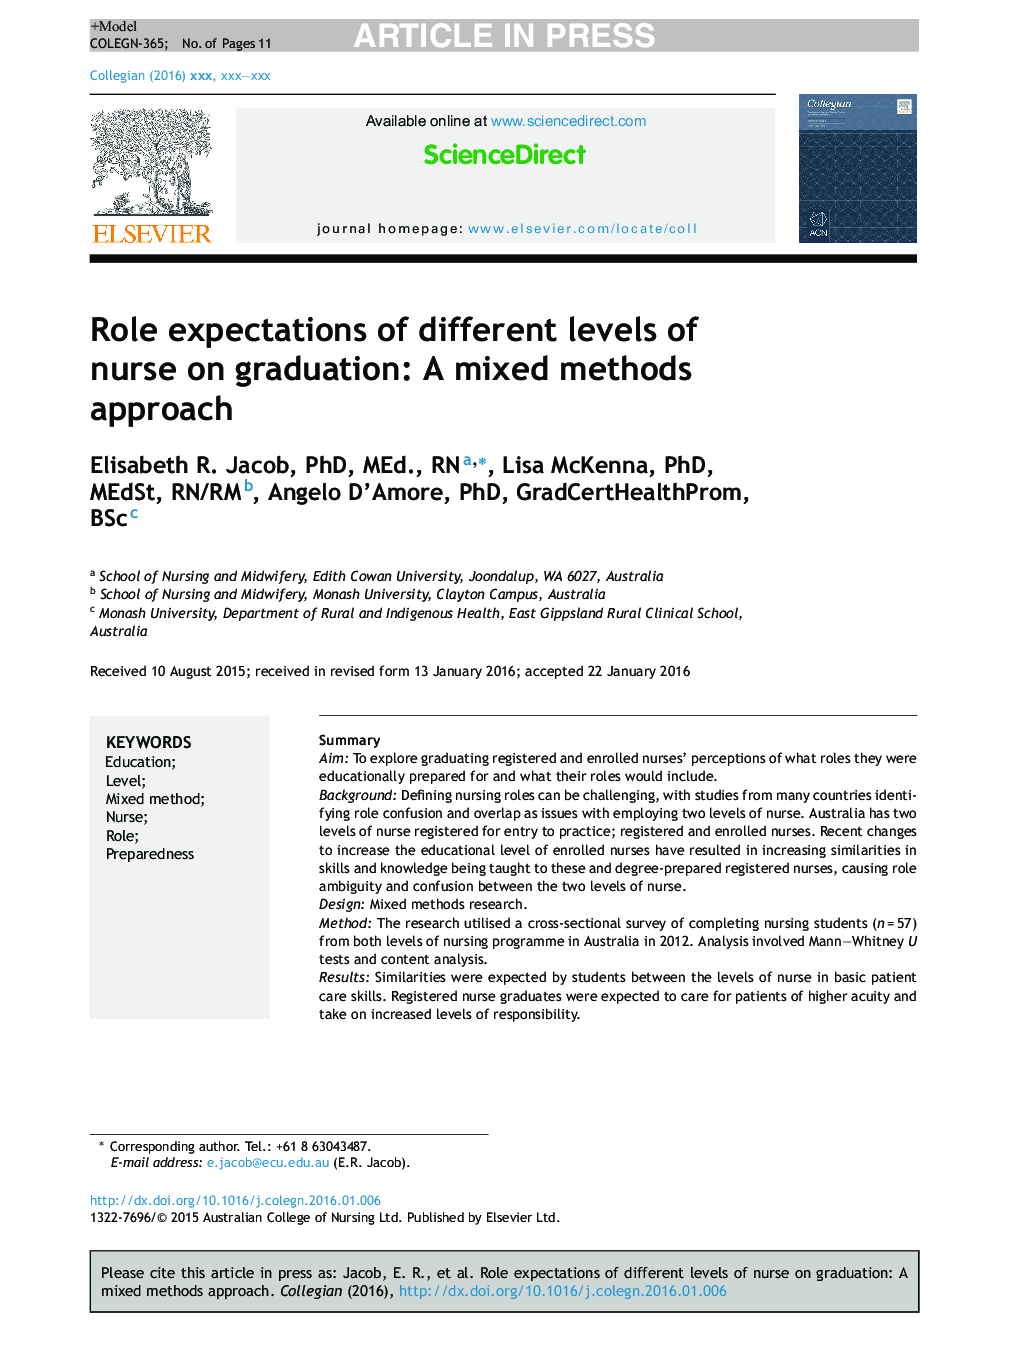 Role expectations of different levels of nurse on graduation: A mixed methods approach